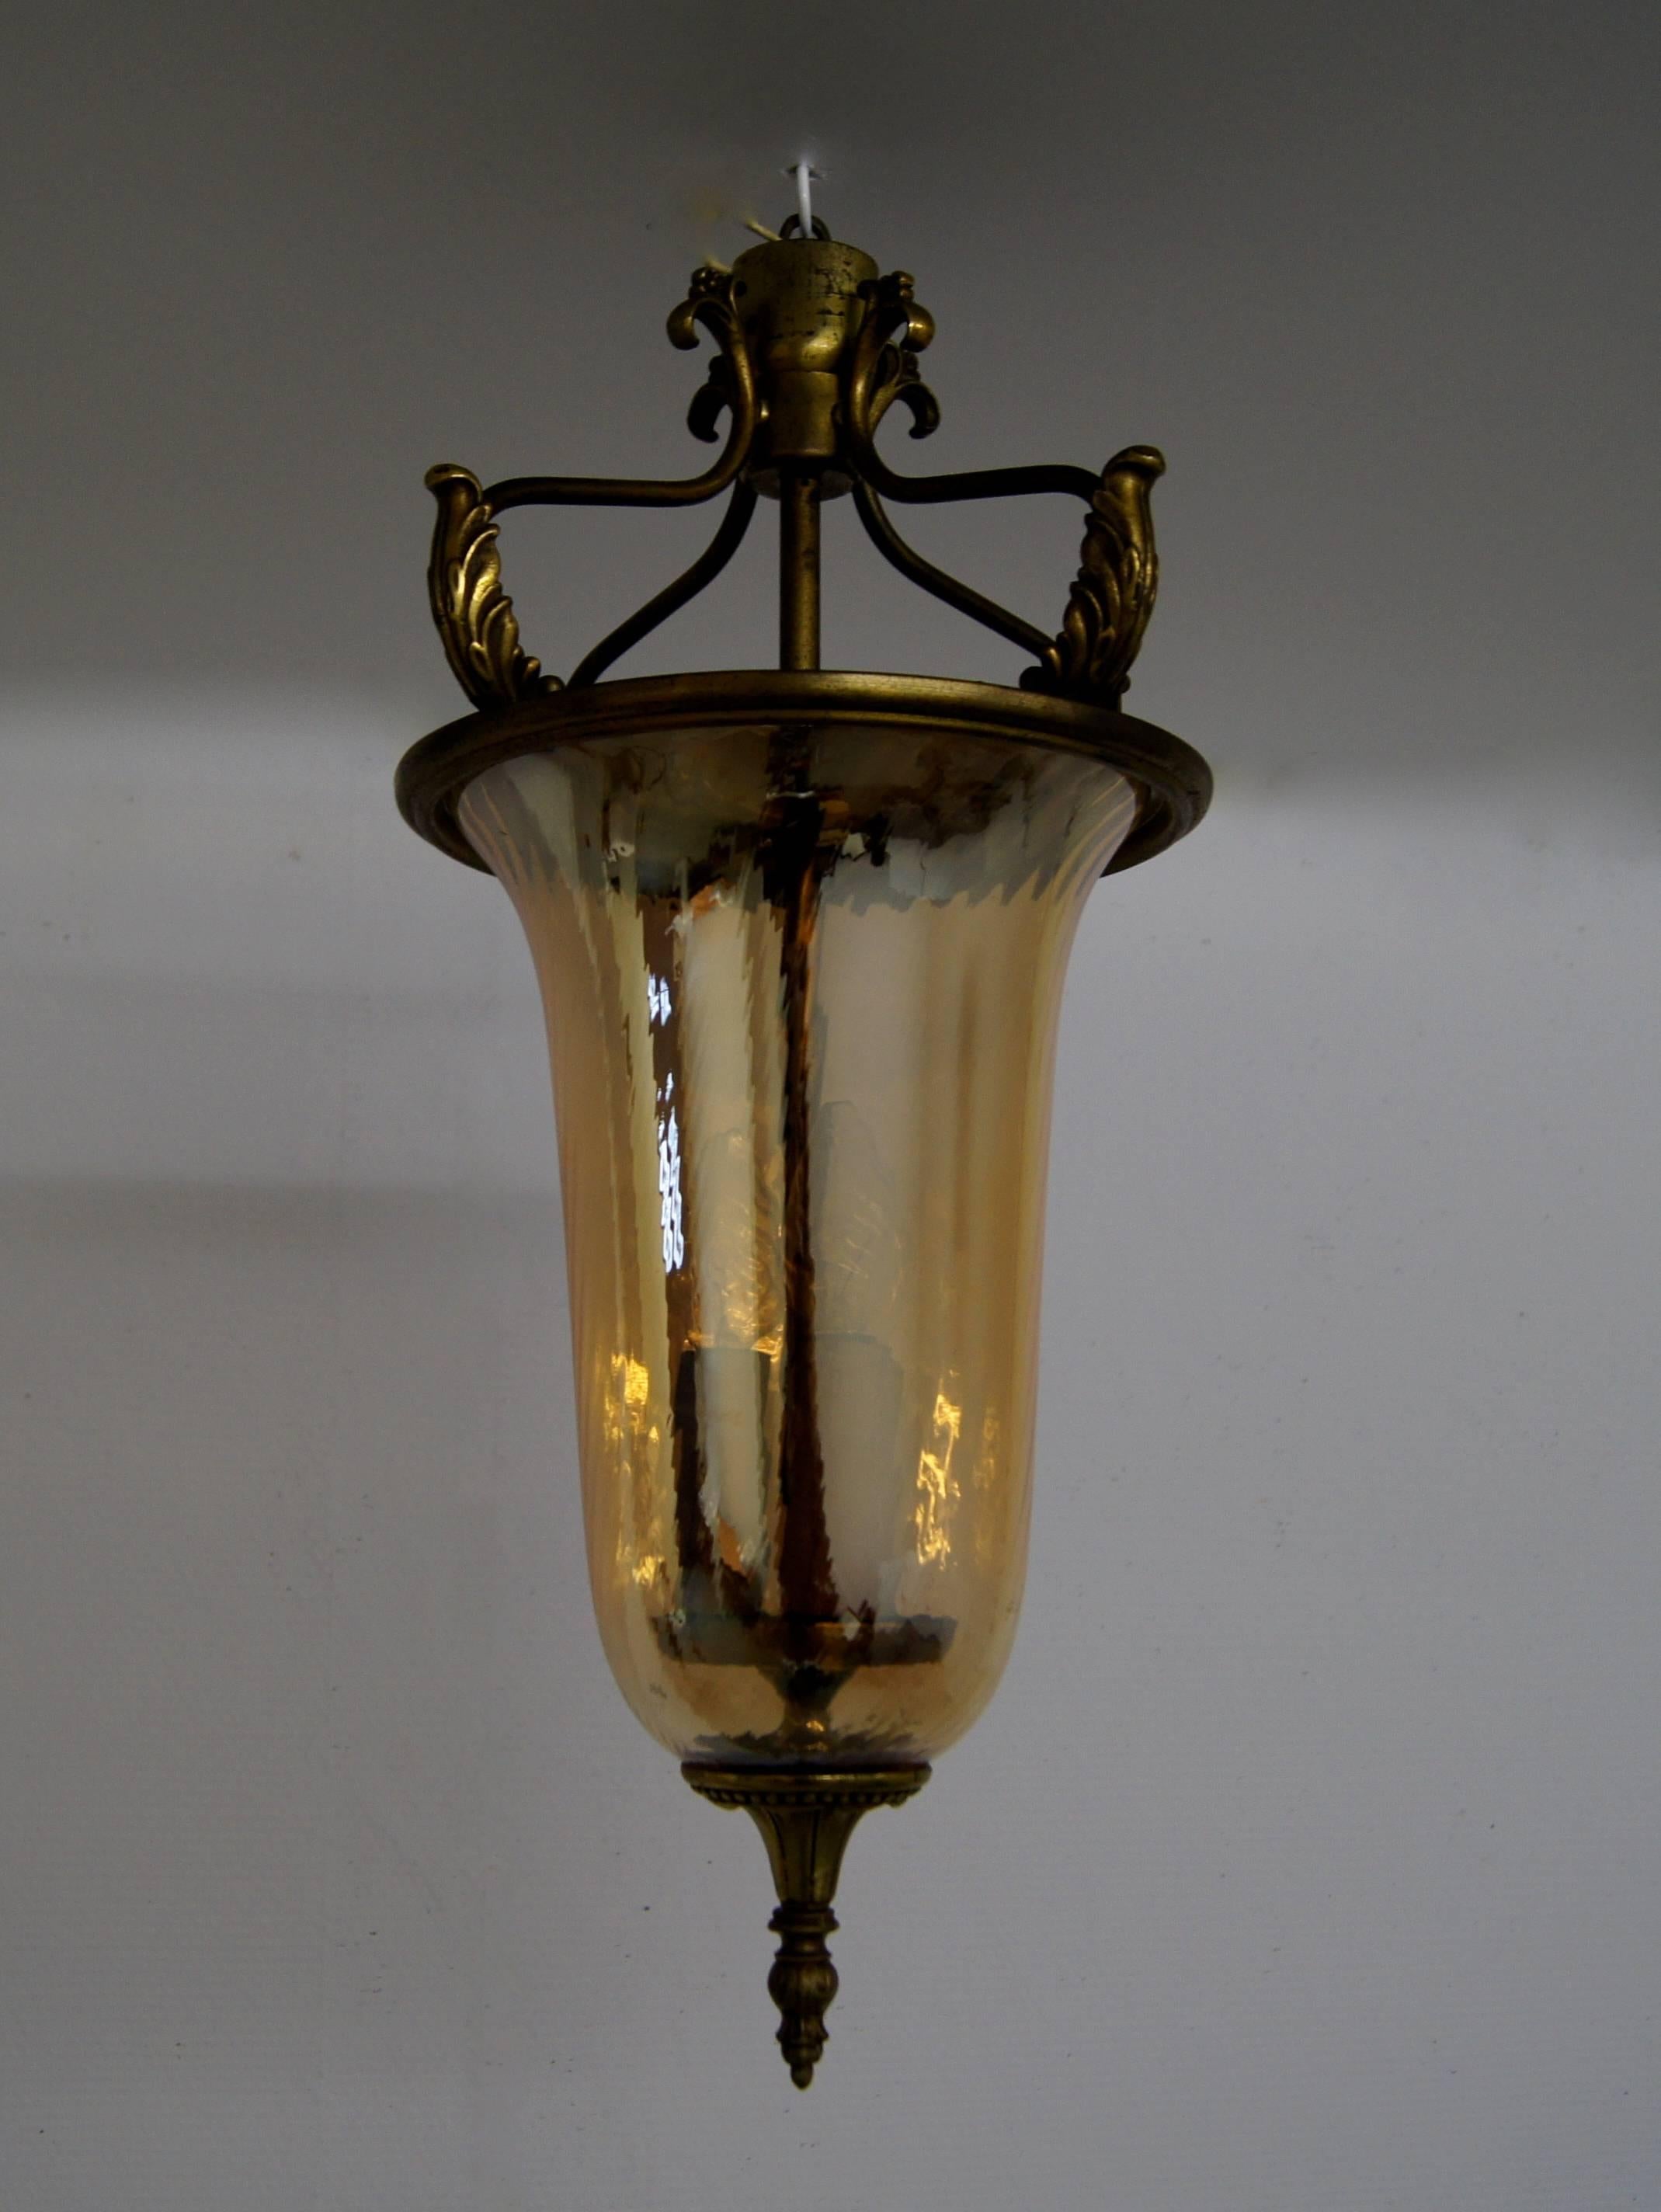 Very elegant and rare Venetian pendant form the 1940s with gold colored glass which has a slight style twirl. The suspension is made of brass with four turned up brass leaves held by its four bent arms that come together holding the middle section